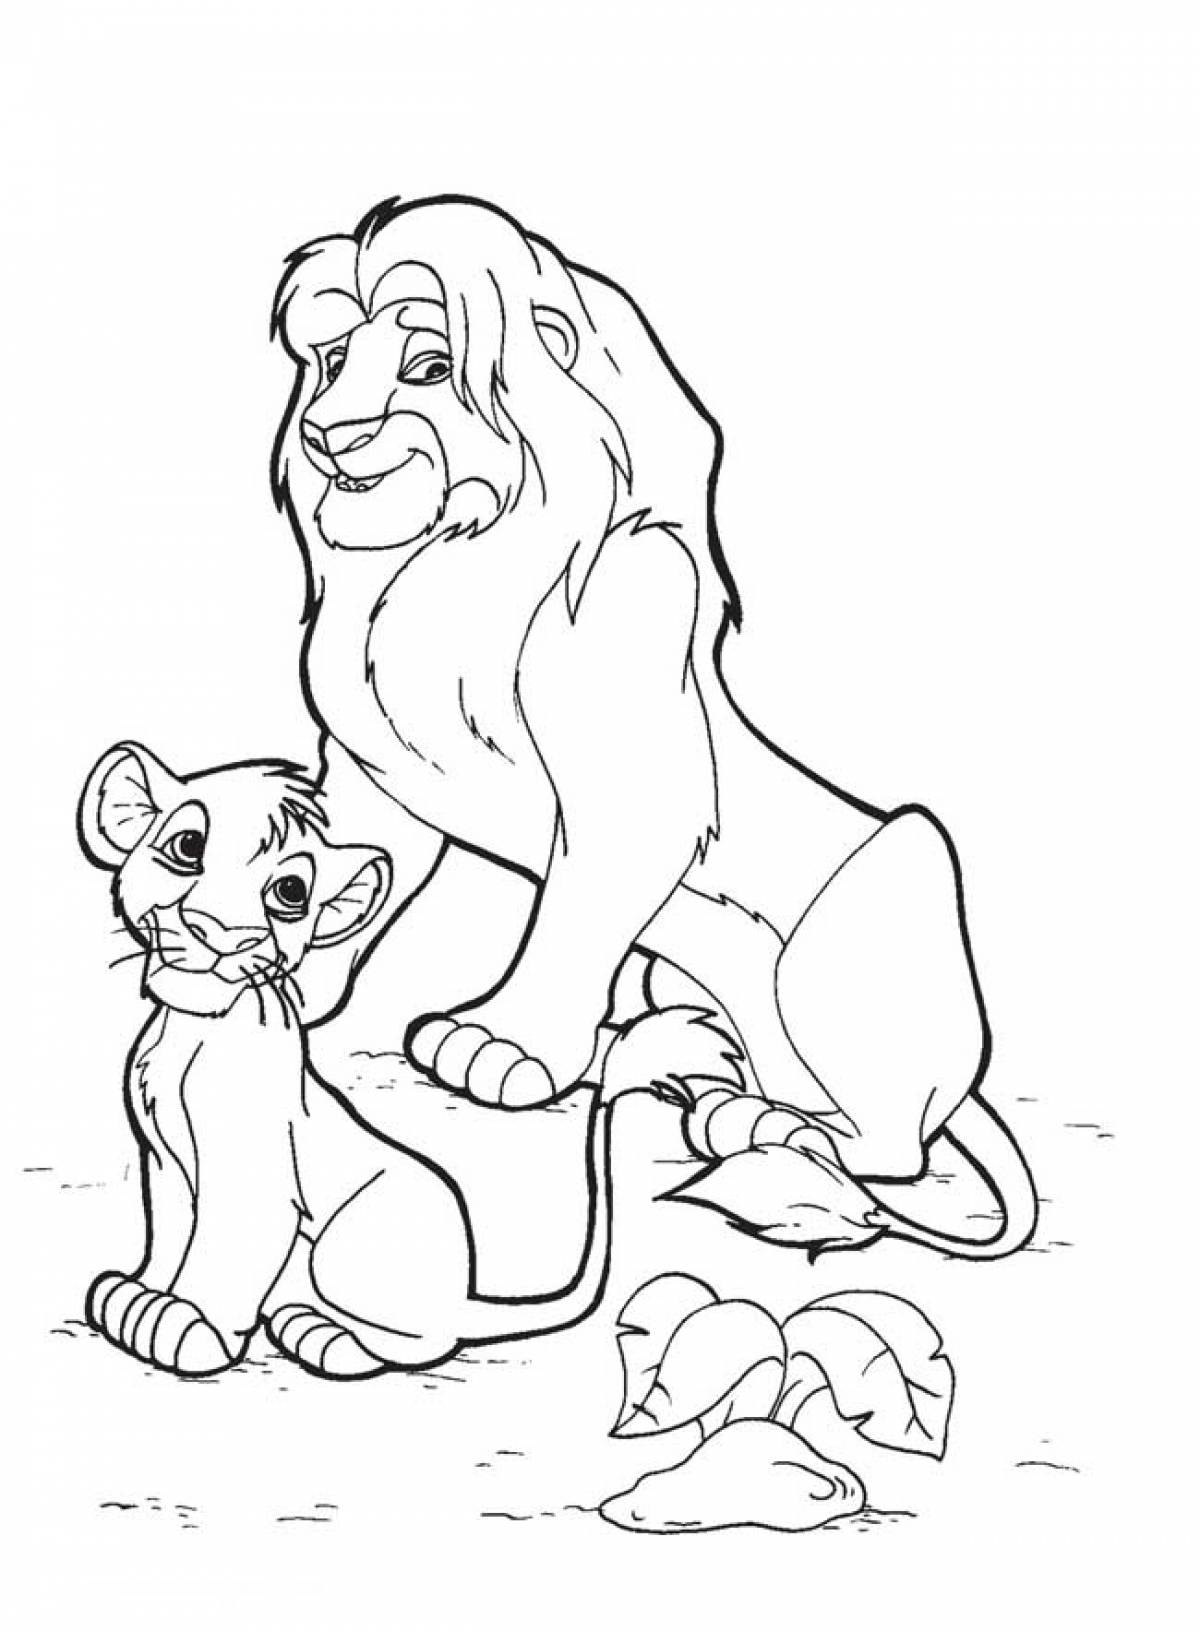 Coloring pages for children 7-8 years old